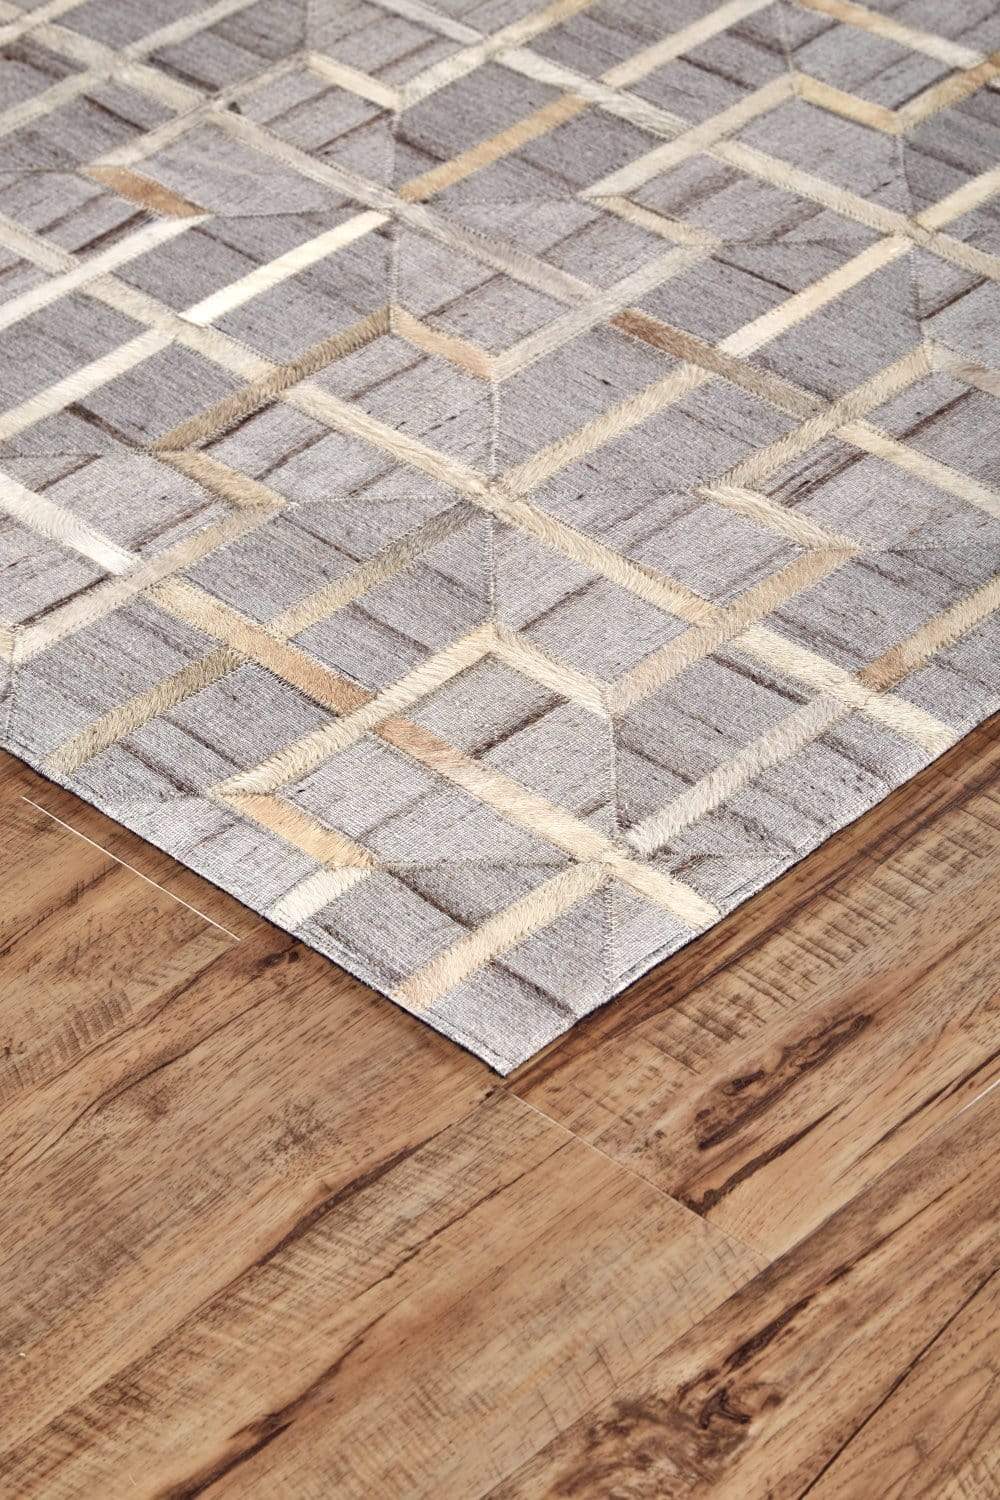 Feizy Feizy Fannin Handmade Leather Trellis Rug - Light Brown & Gray - Available in 4 Sizes